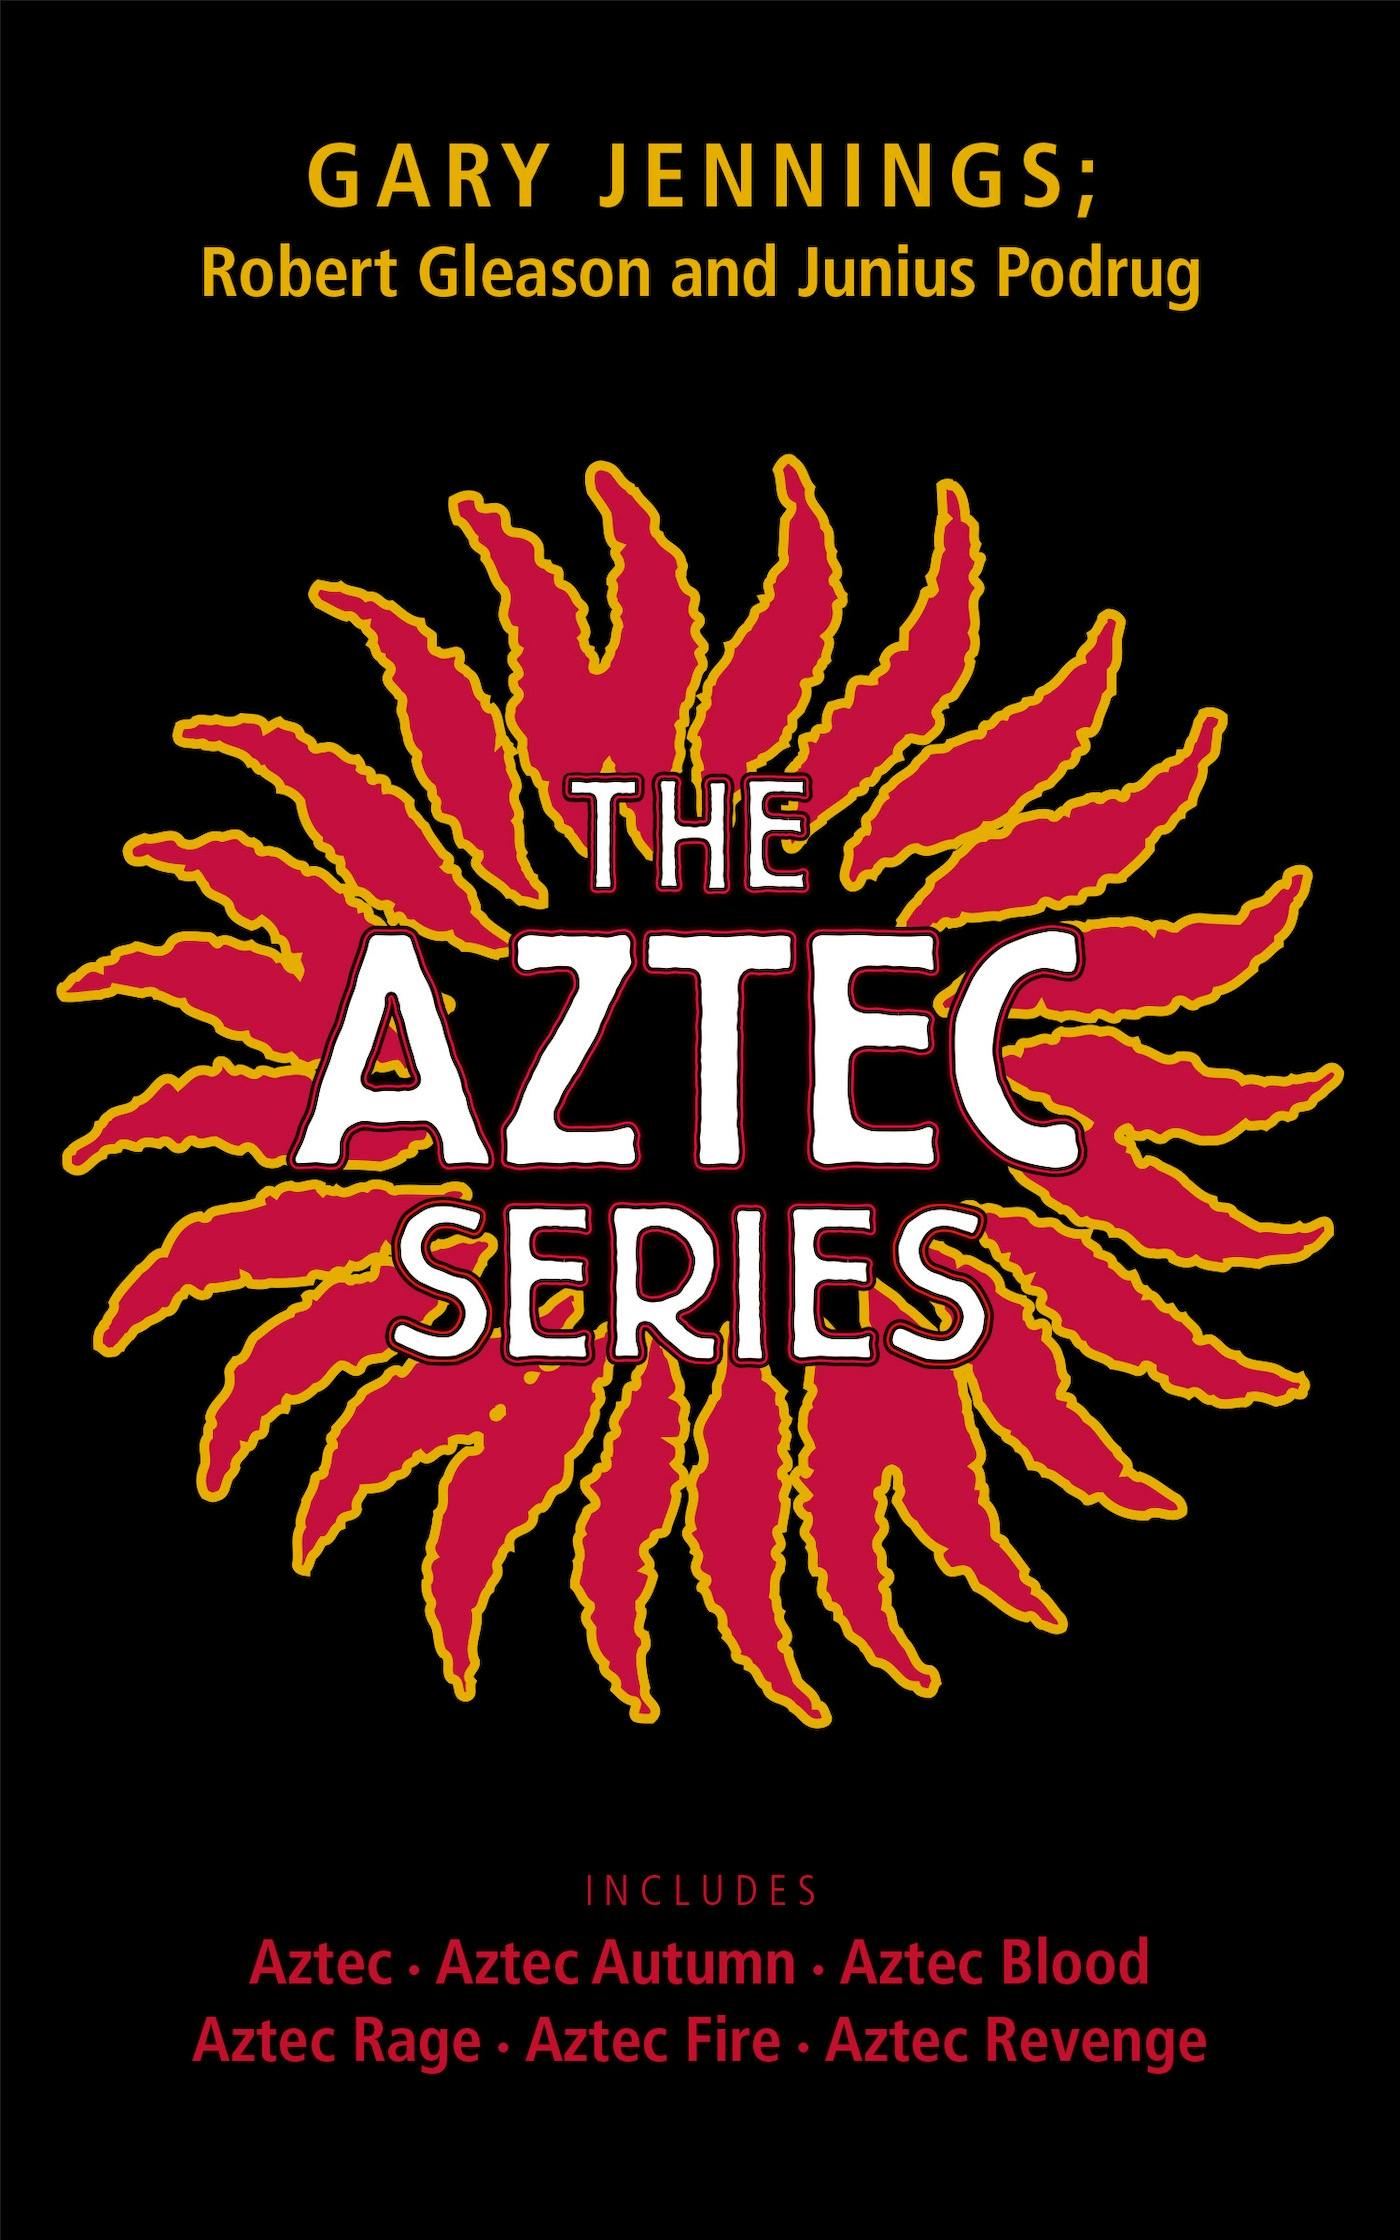 Cover for the book titled as: Aztec Series